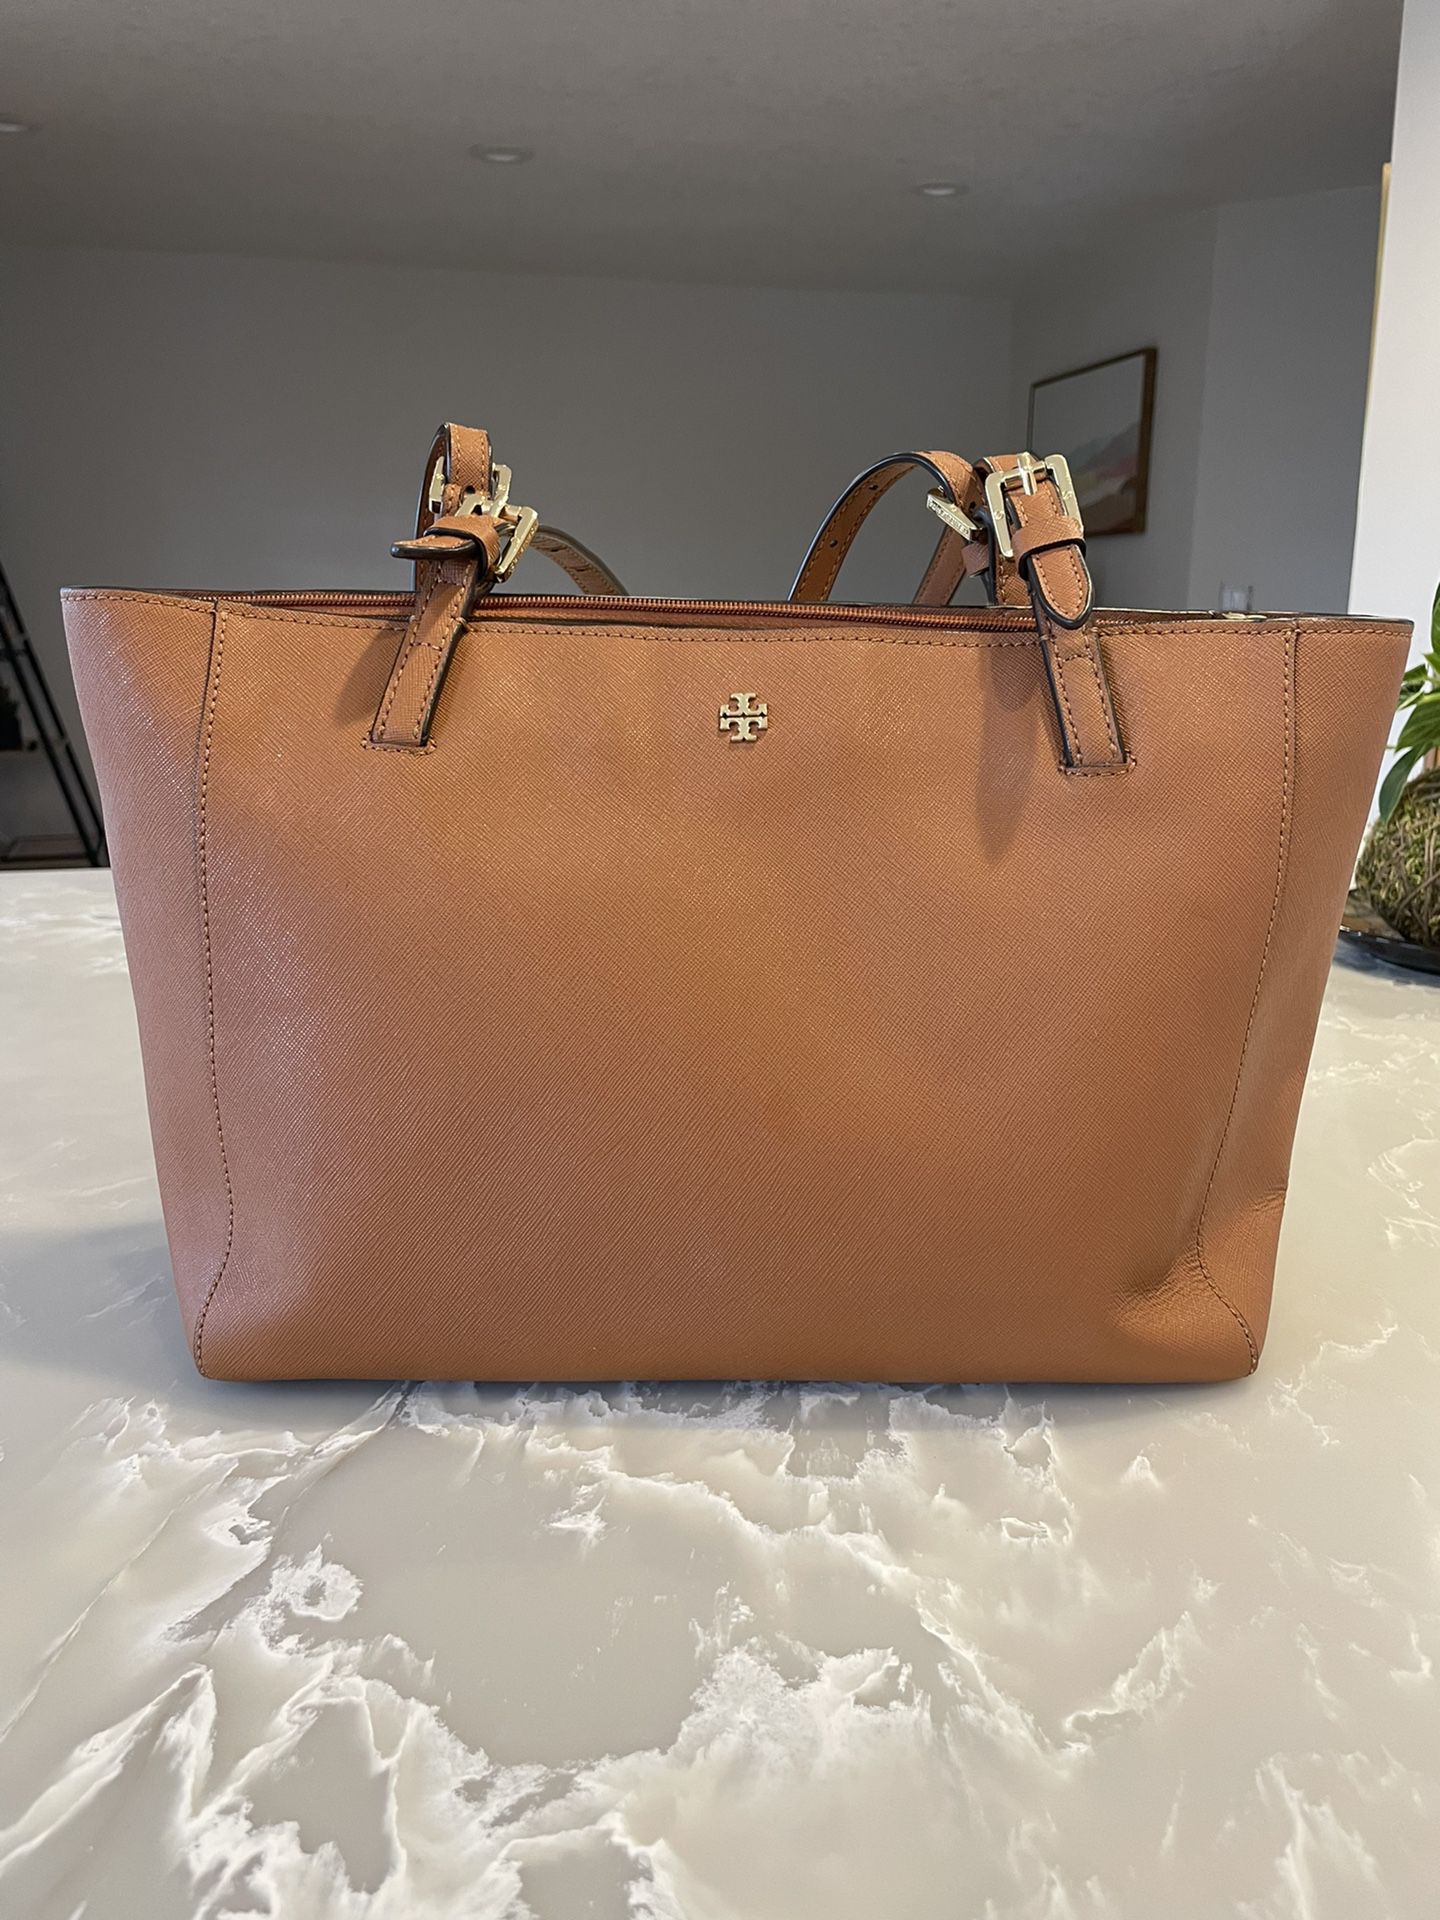 Tory Burch Shoulder Bag With Dust Cover for Sale in Portland, OR - OfferUp